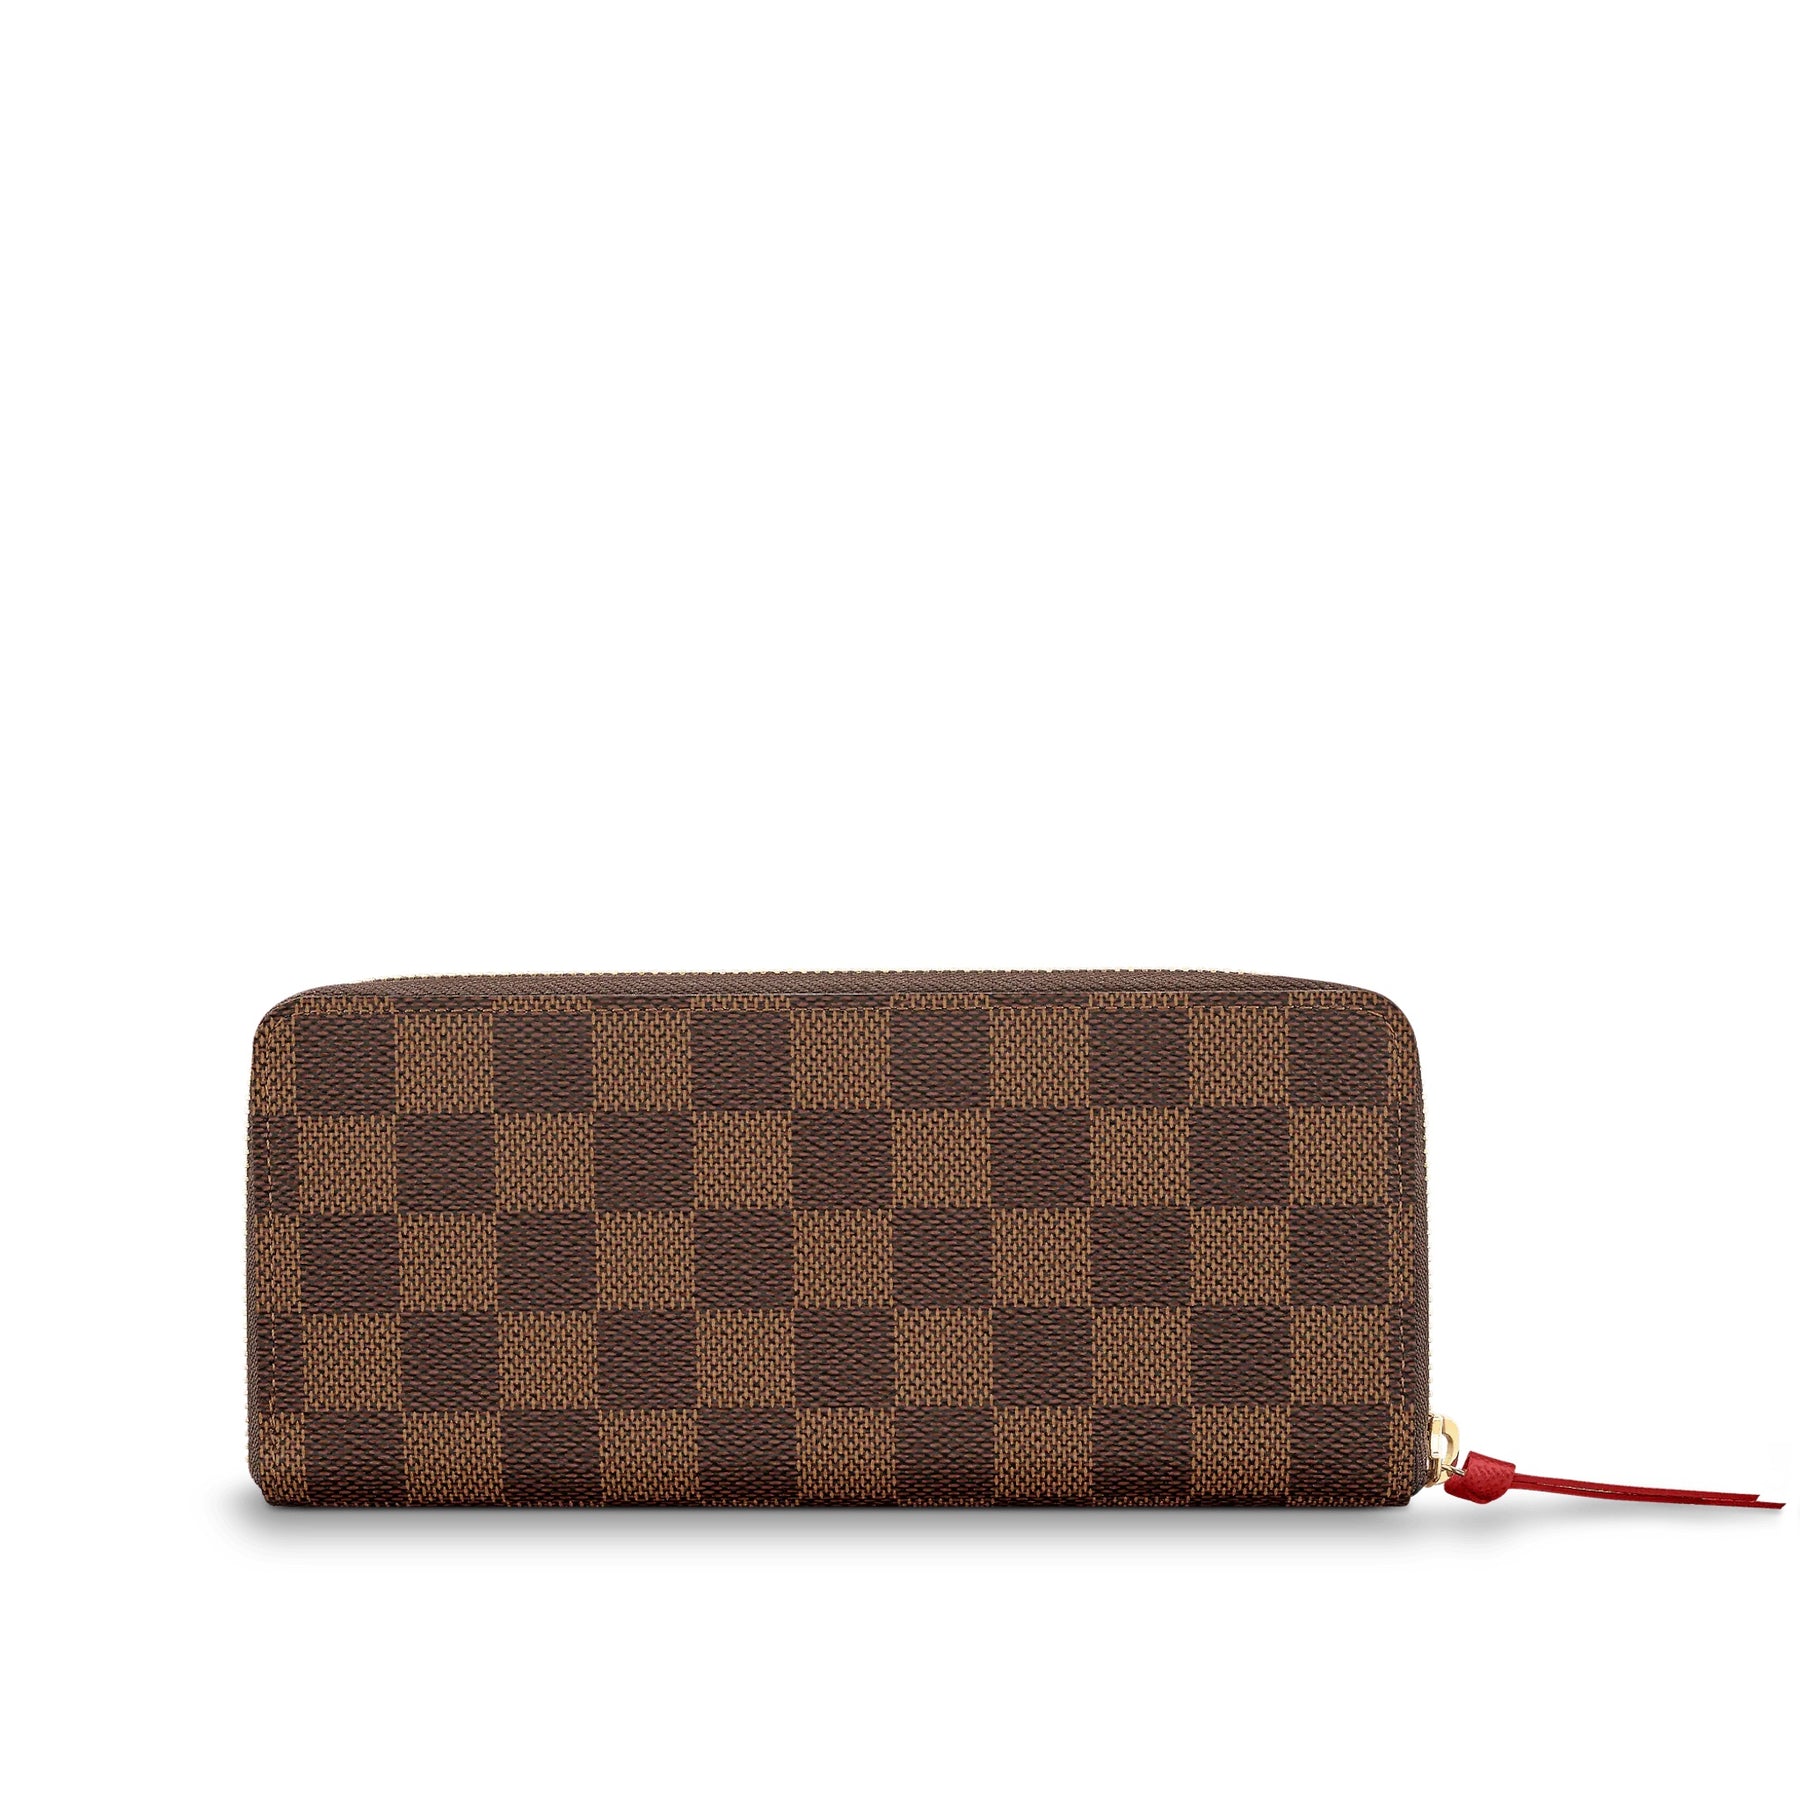 Louis Vuitton - Authenticated Clemence Wallet - Cloth Brown for Women, Very Good Condition